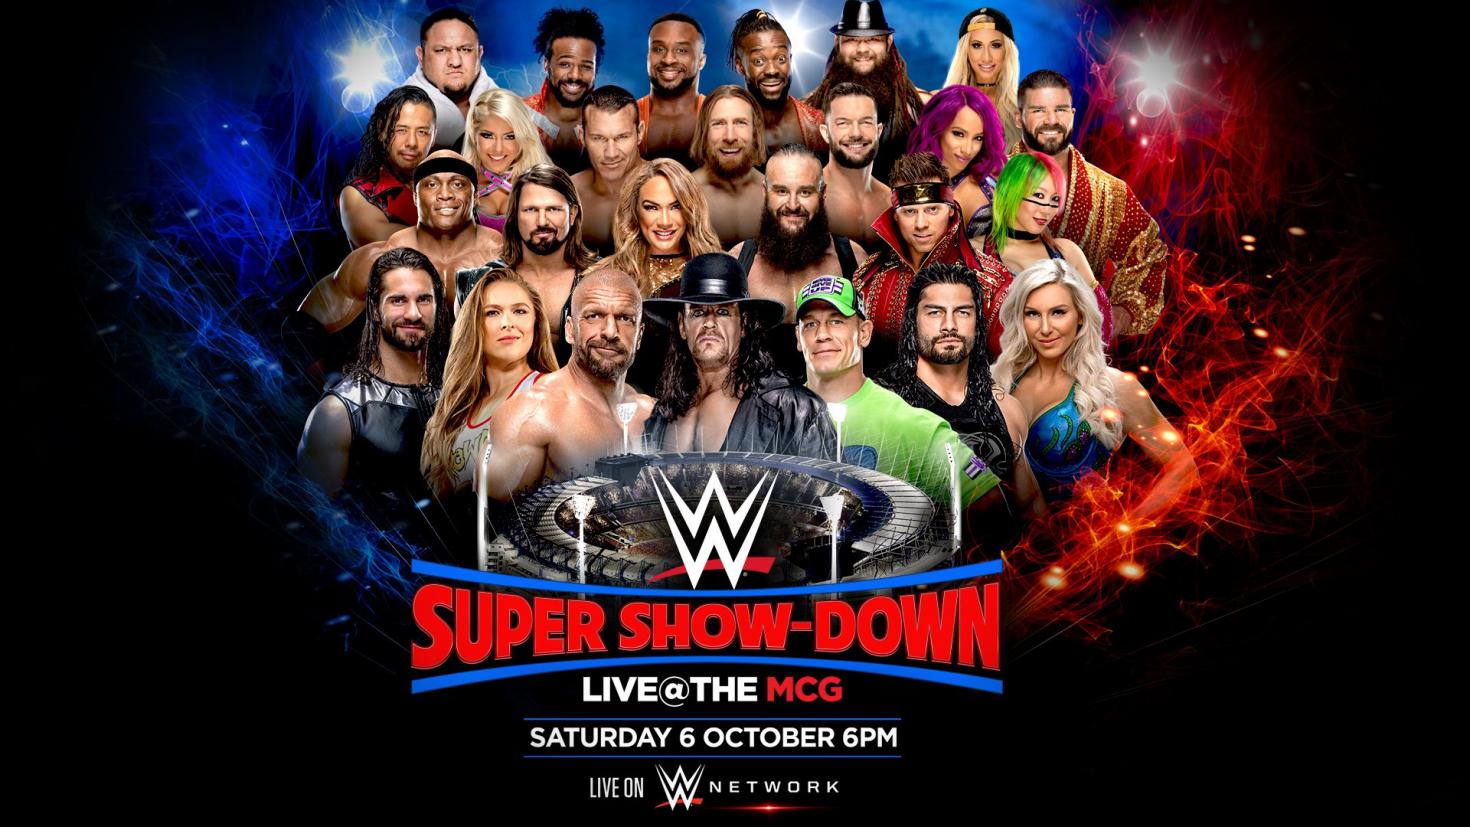 WWE Super Show-Down PPV Announced for MCG in October